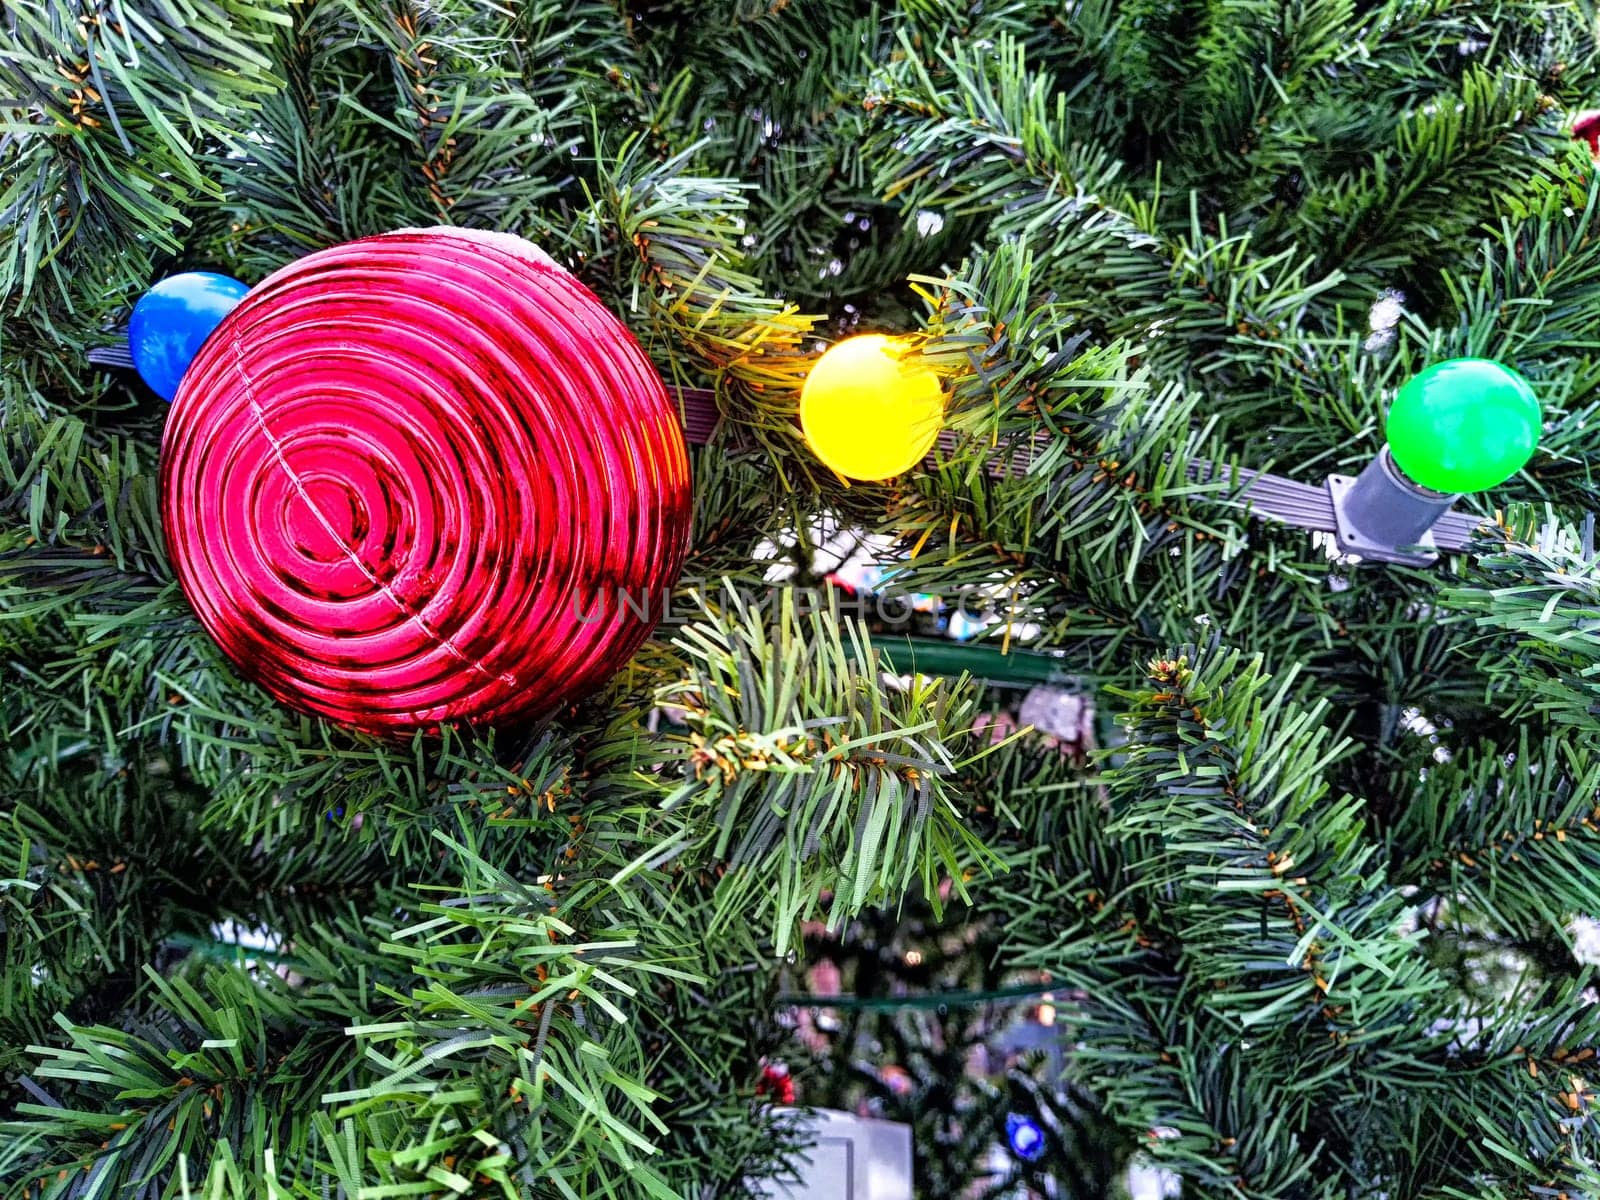 Festive Red Ornament Adorning a Lush Christmas Tree. A vibrant red ball nestled among green branches with multicolored lights by keleny